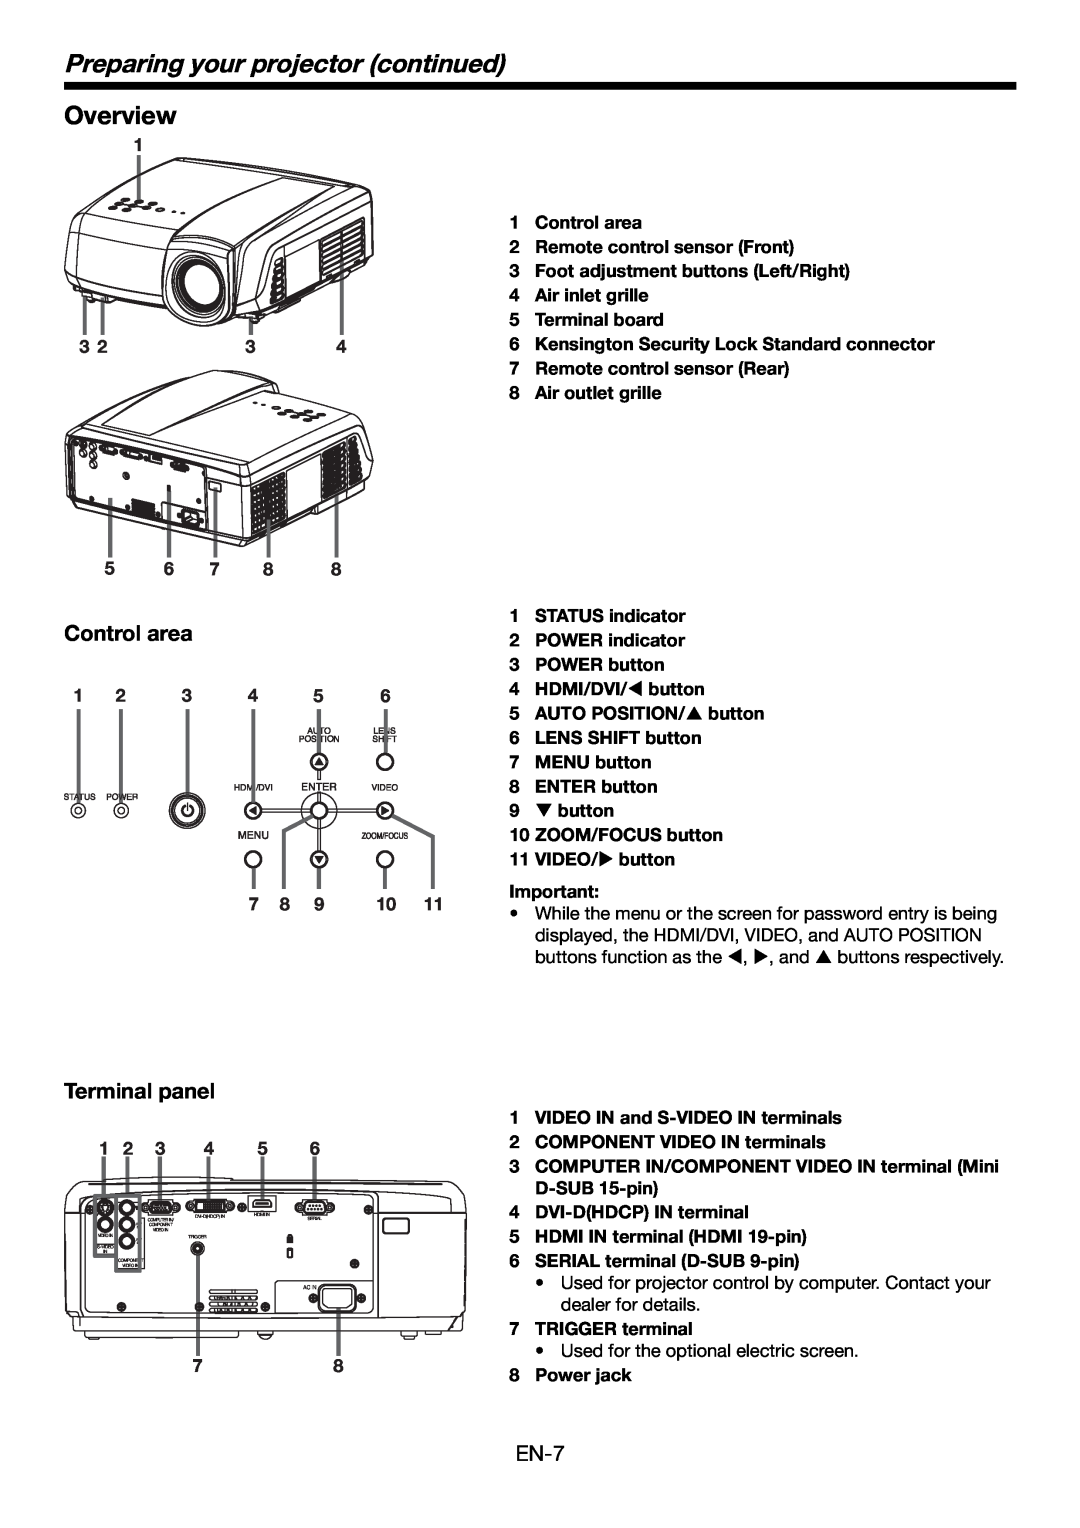 Mitsubishi Electronics HC4900 Preparing your projector continued, Overview, Control area, Terminal panel, TRIGGER terminal 